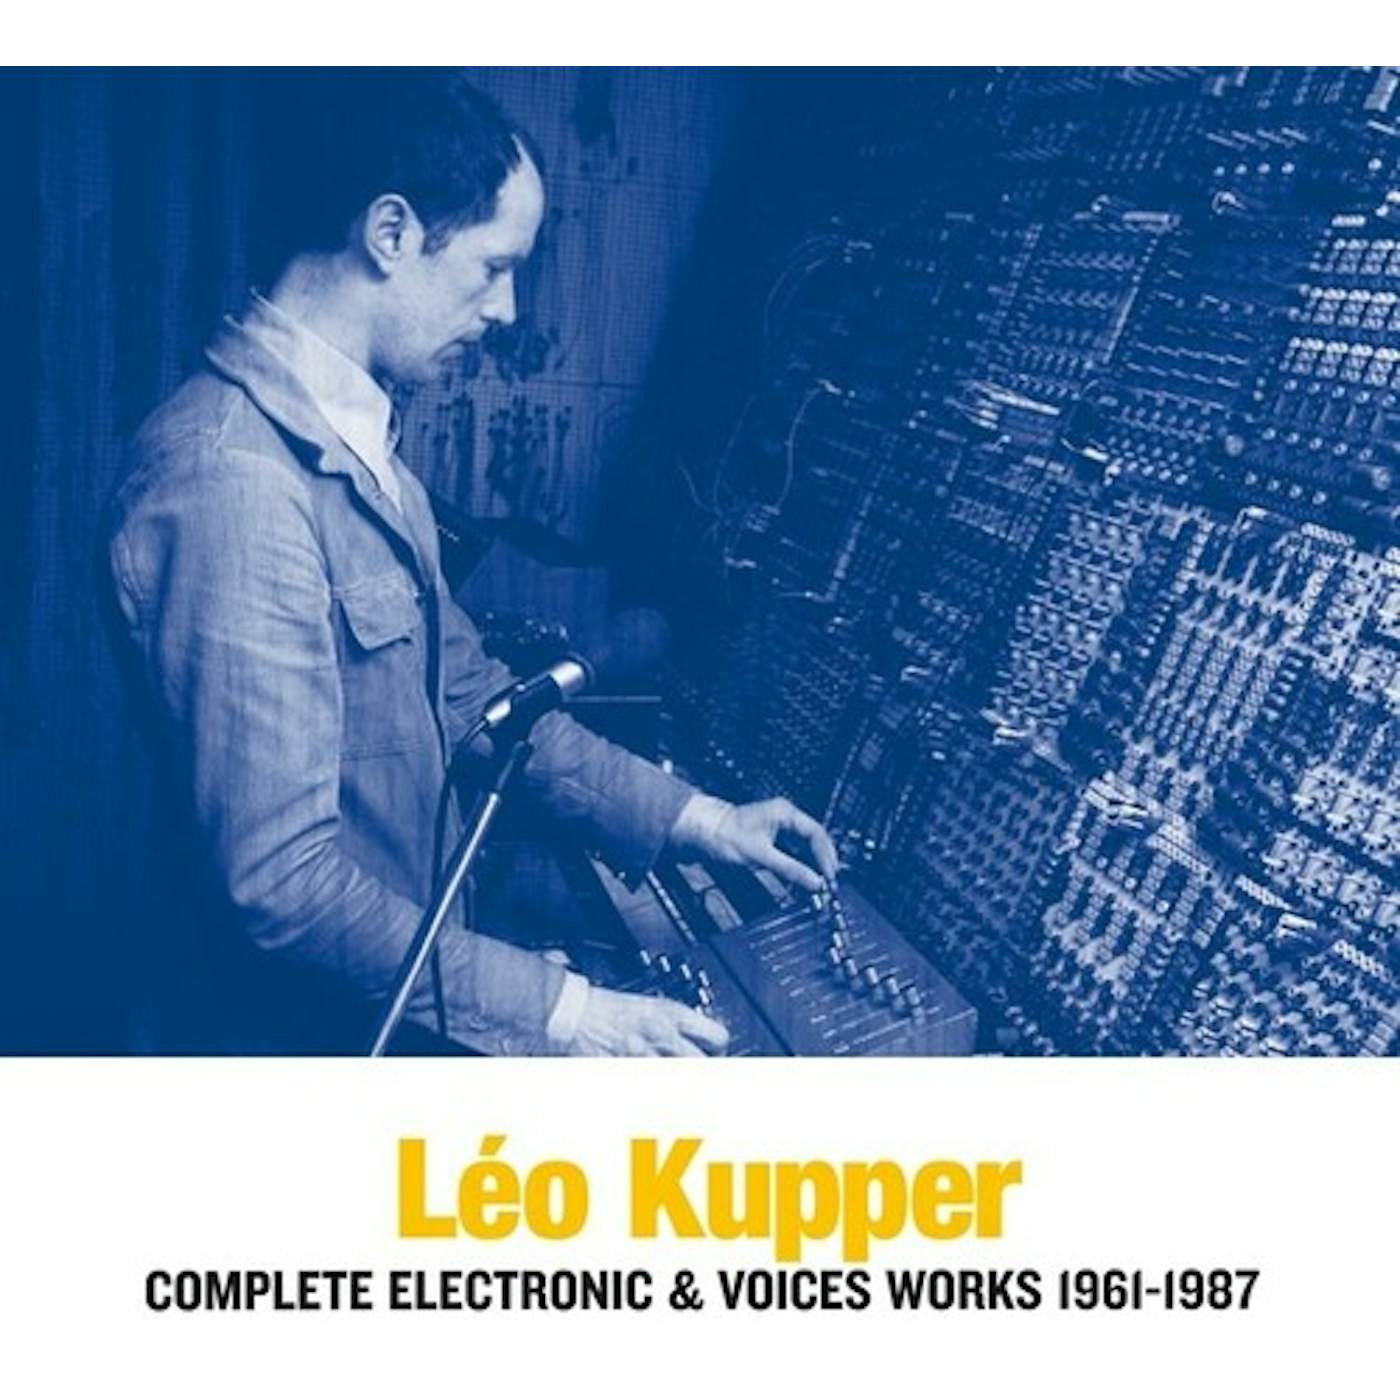 Leo Küpper COMPLETE ELECTRONIC & VOICES WORKS 1961-1987 CD